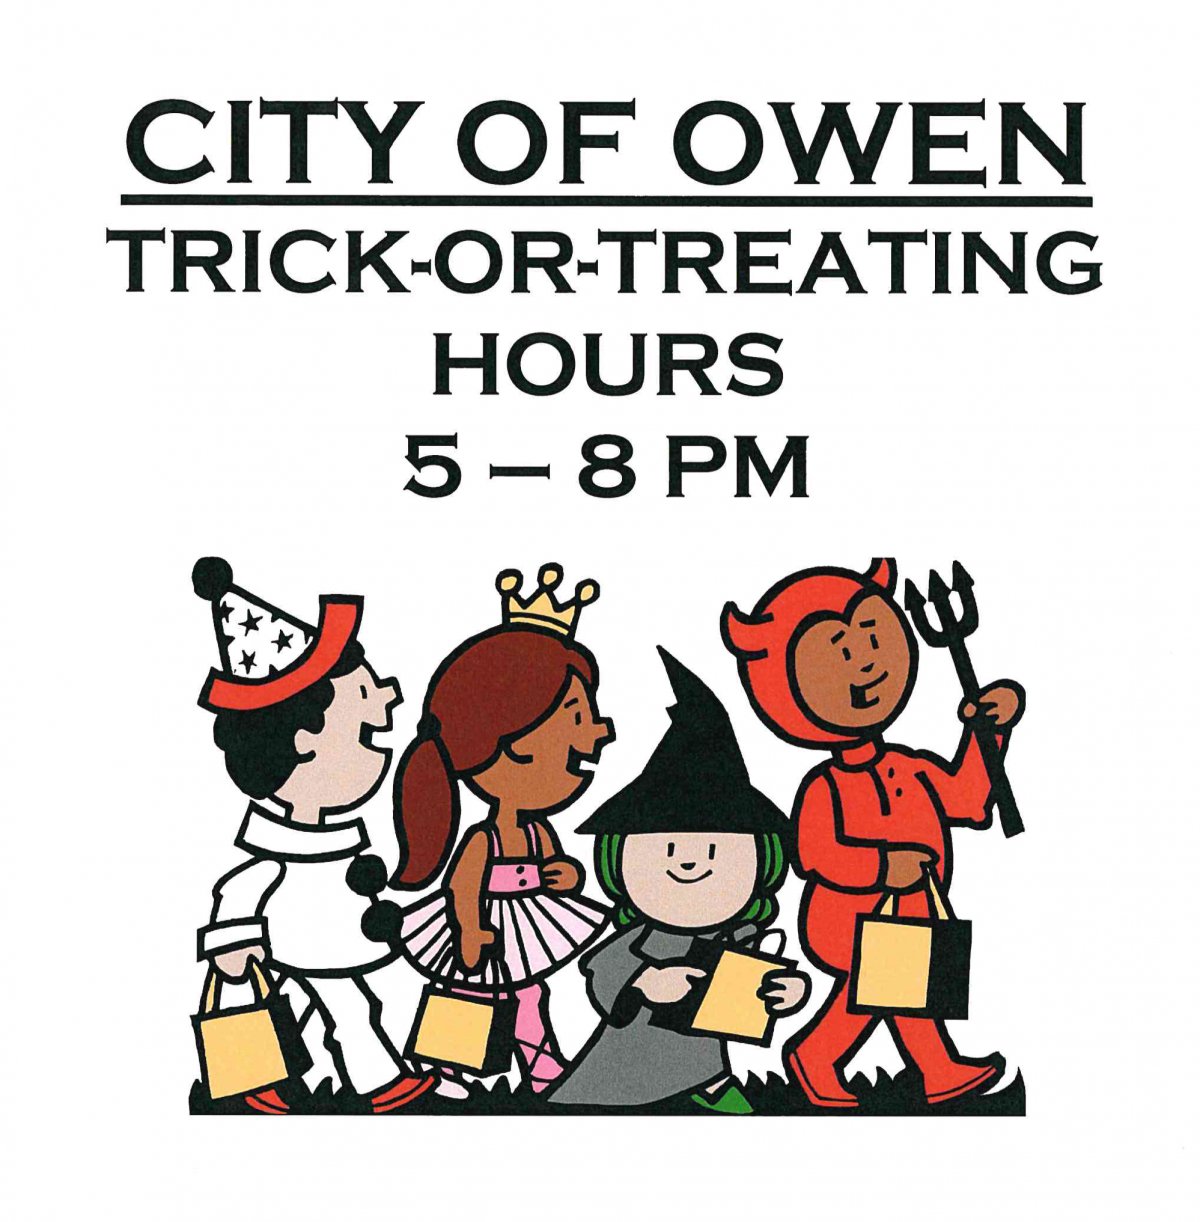 TRICK-OR-TREATING HOURS